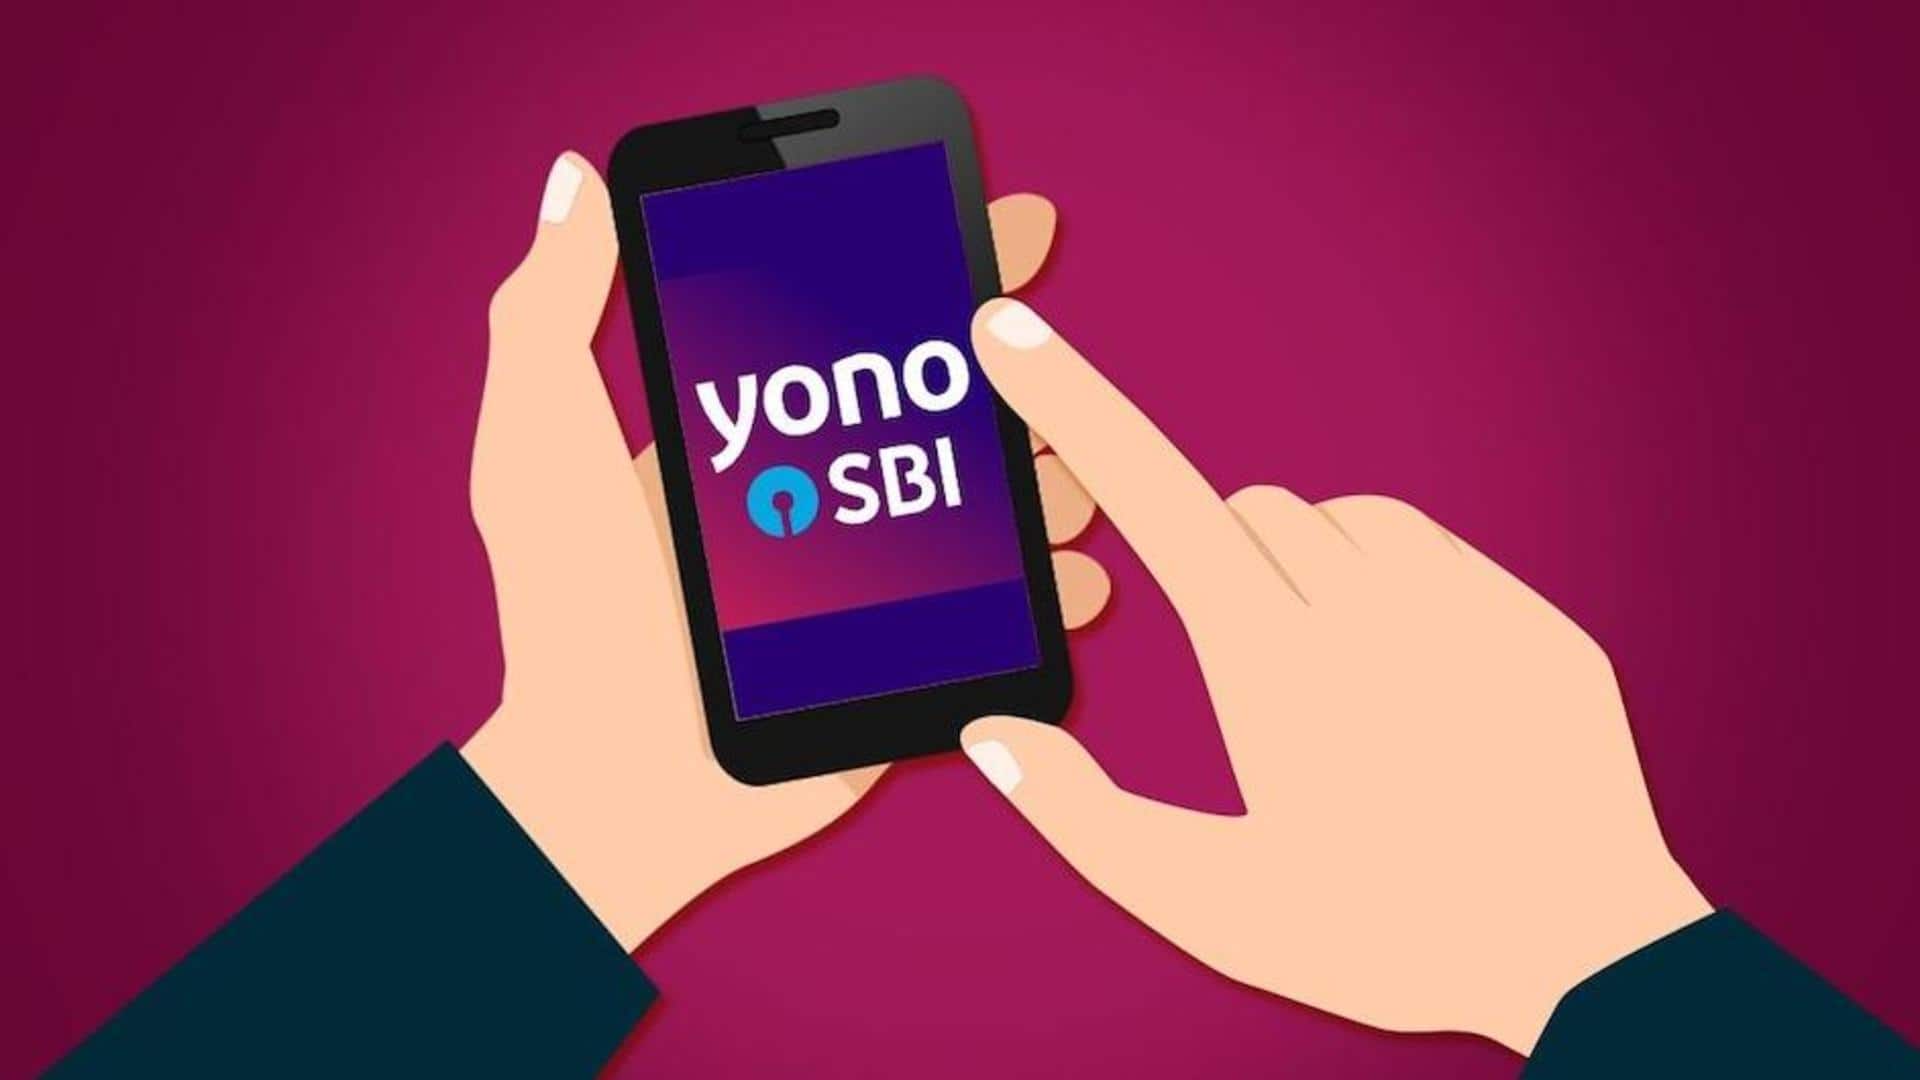 Sbi yono cash withdrawal without atm card | Atm card, Customer care, Atm